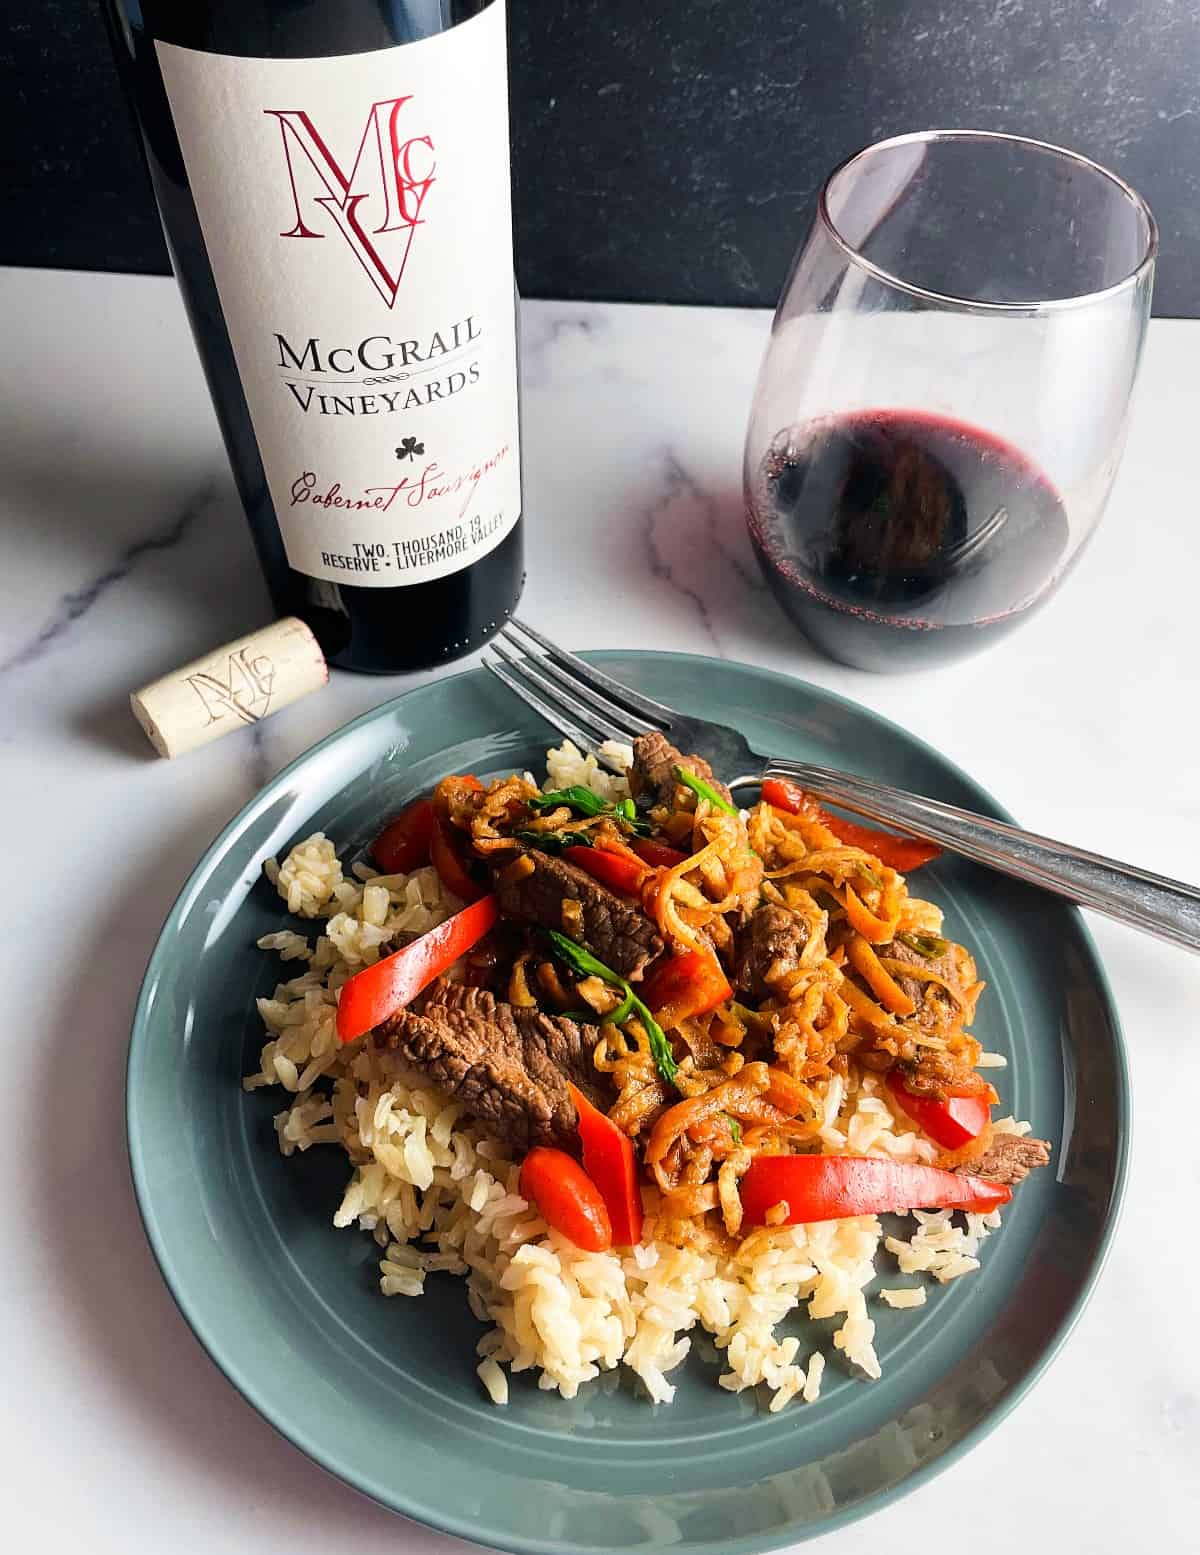 Stir-fried slices of steak and red bell pepper served over brown rice on a gray plate. A bottle and glass of Cabernet Sauvignon red wine in the background.